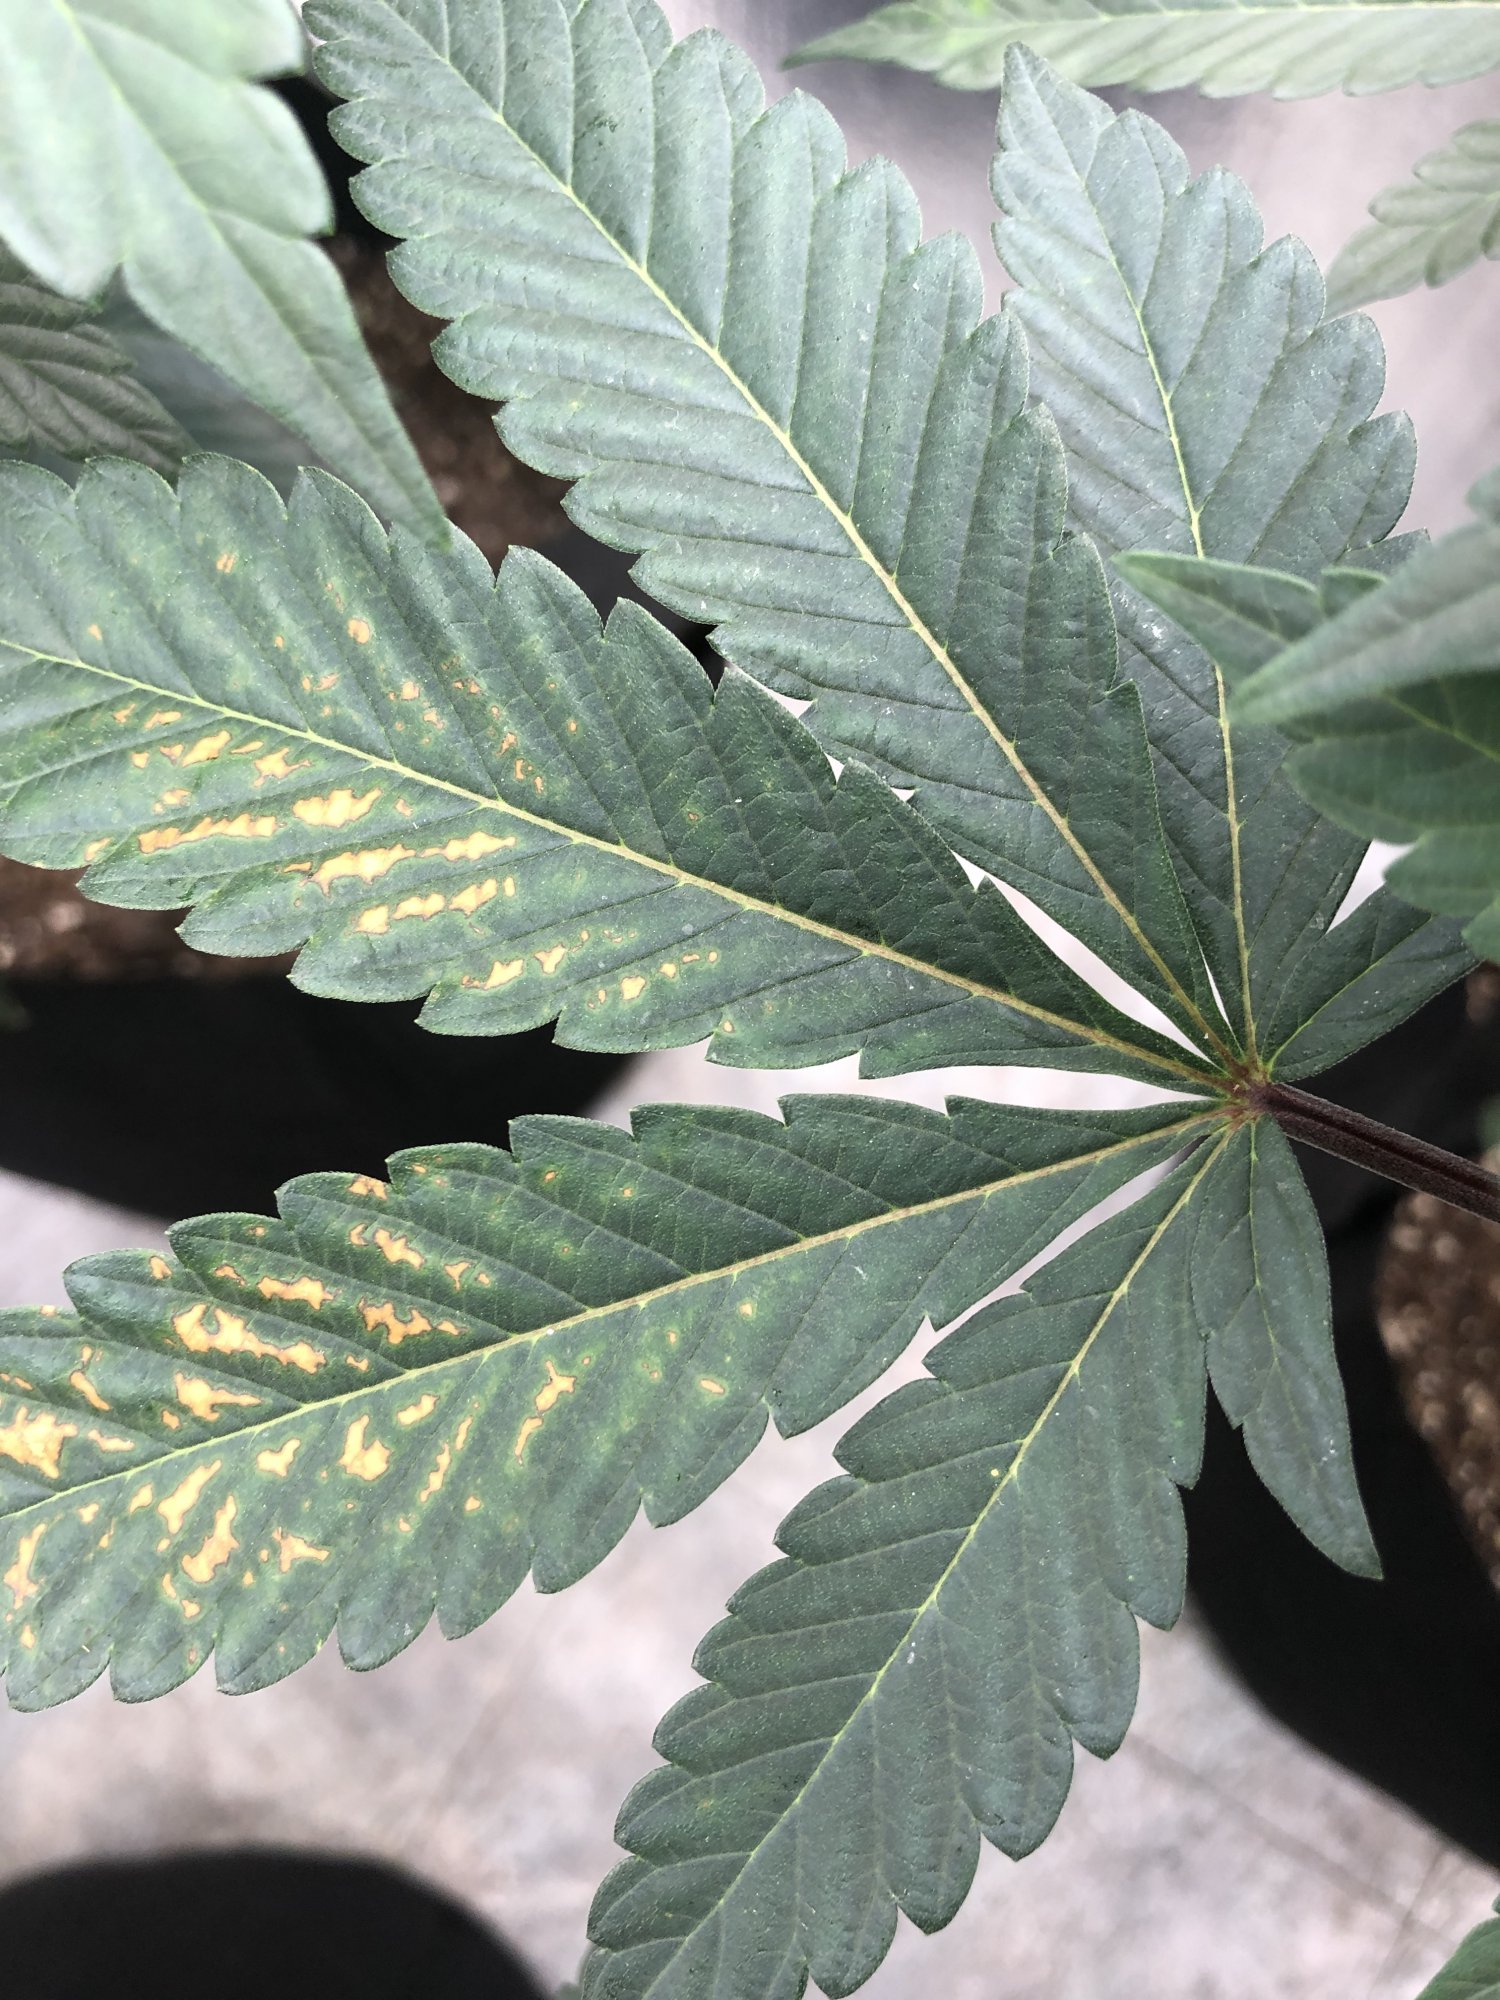 What could this deficiency help 3